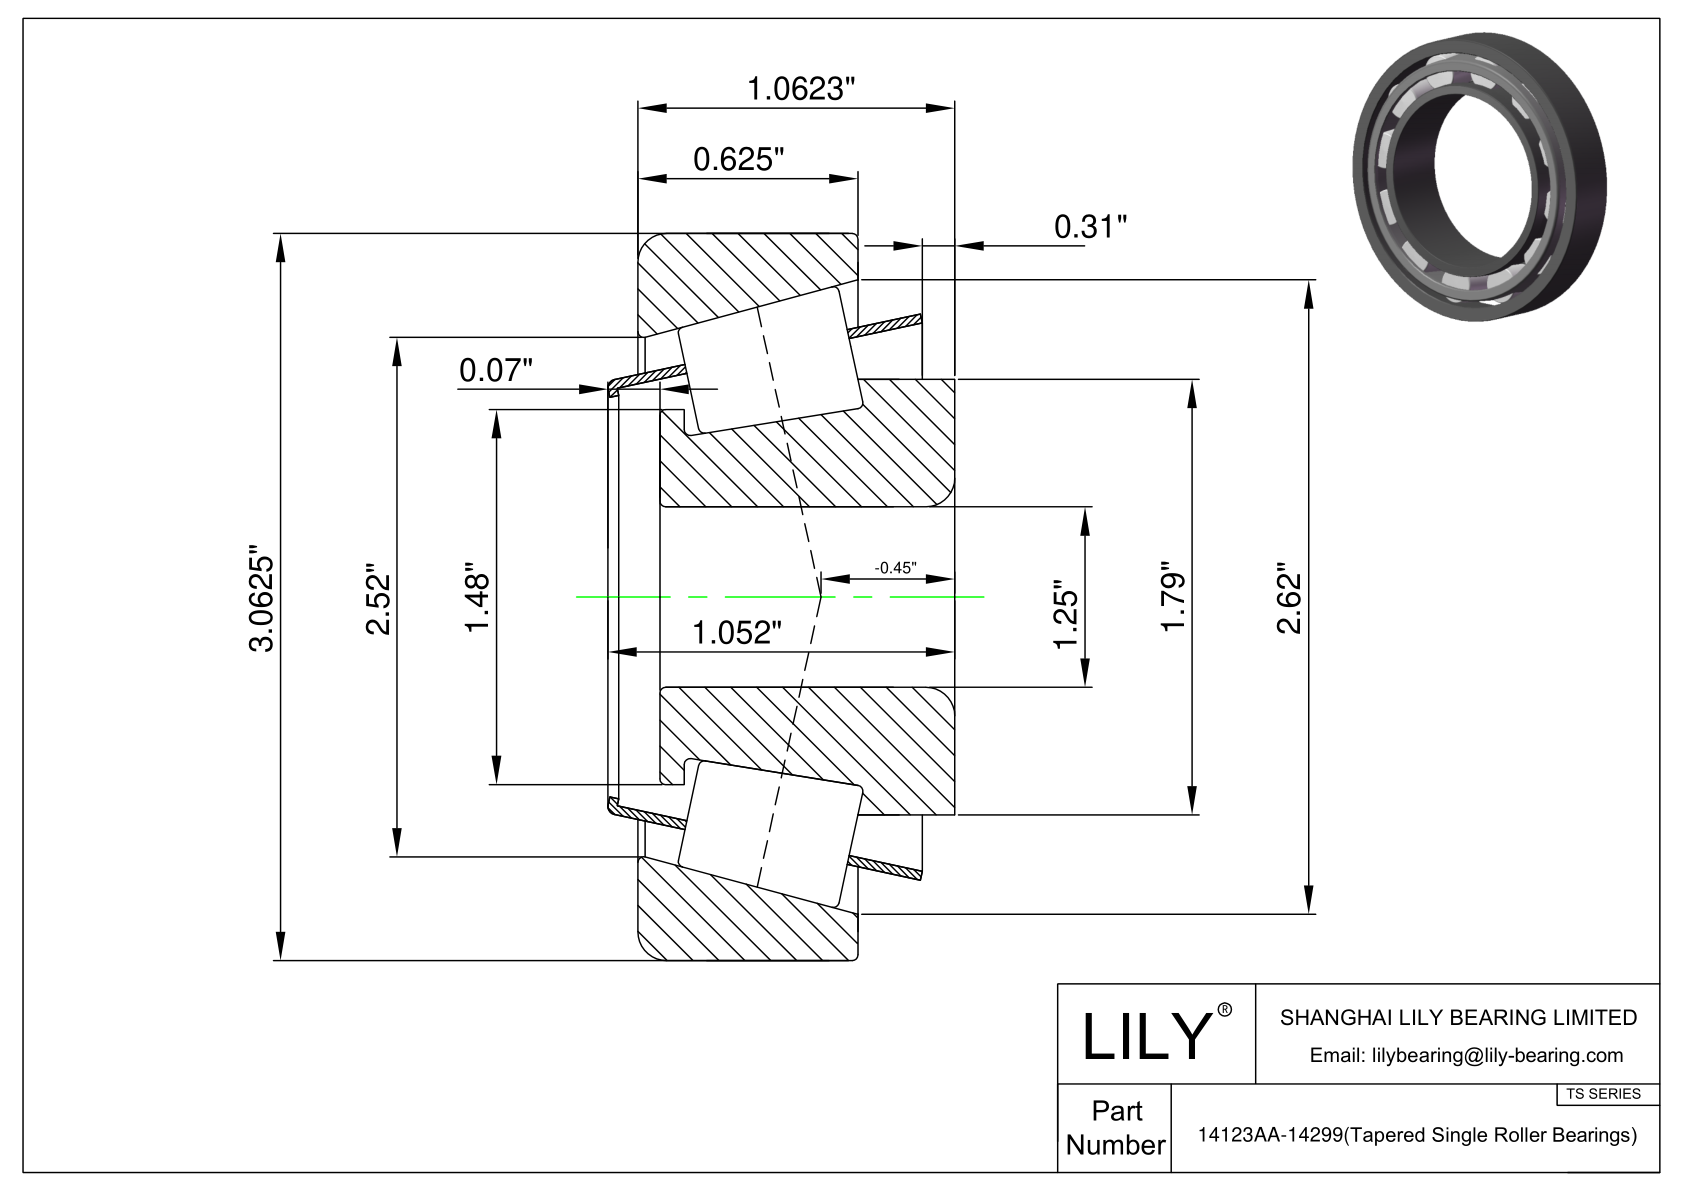 14123AA-14299 TS (Tapered Single Roller Bearings) (Imperial) cad drawing